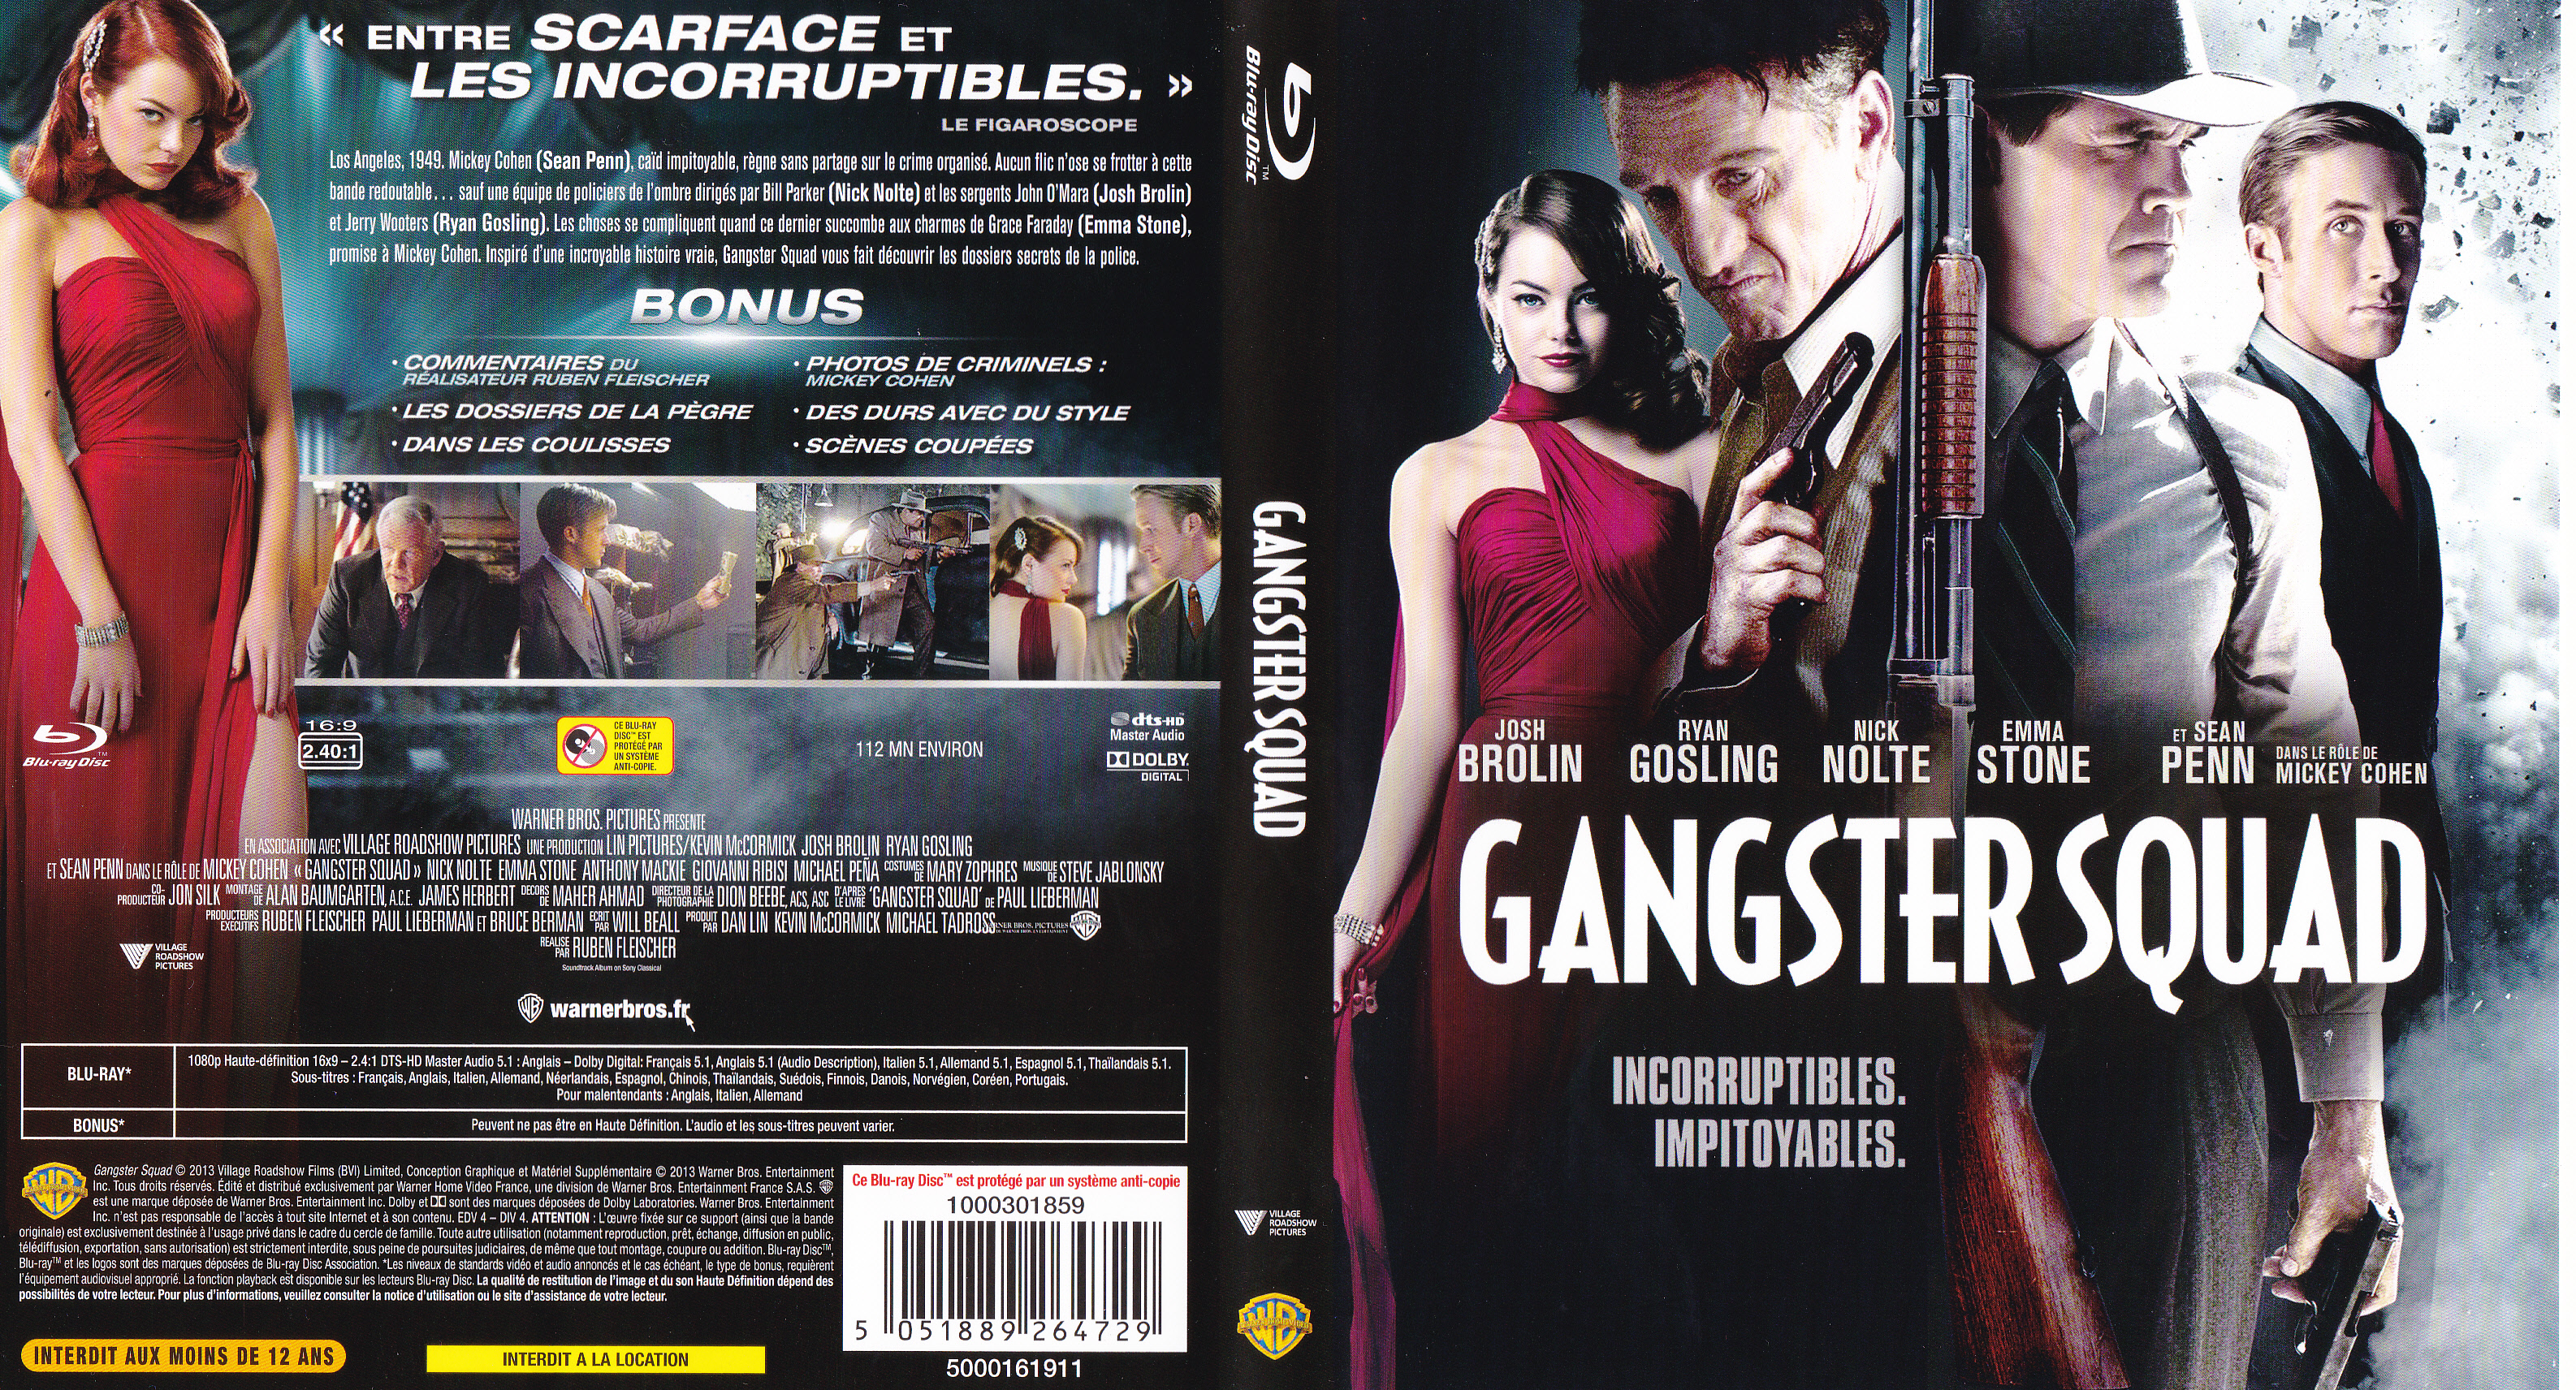 Jaquette DVD Gangster squad (BLU-RAY)